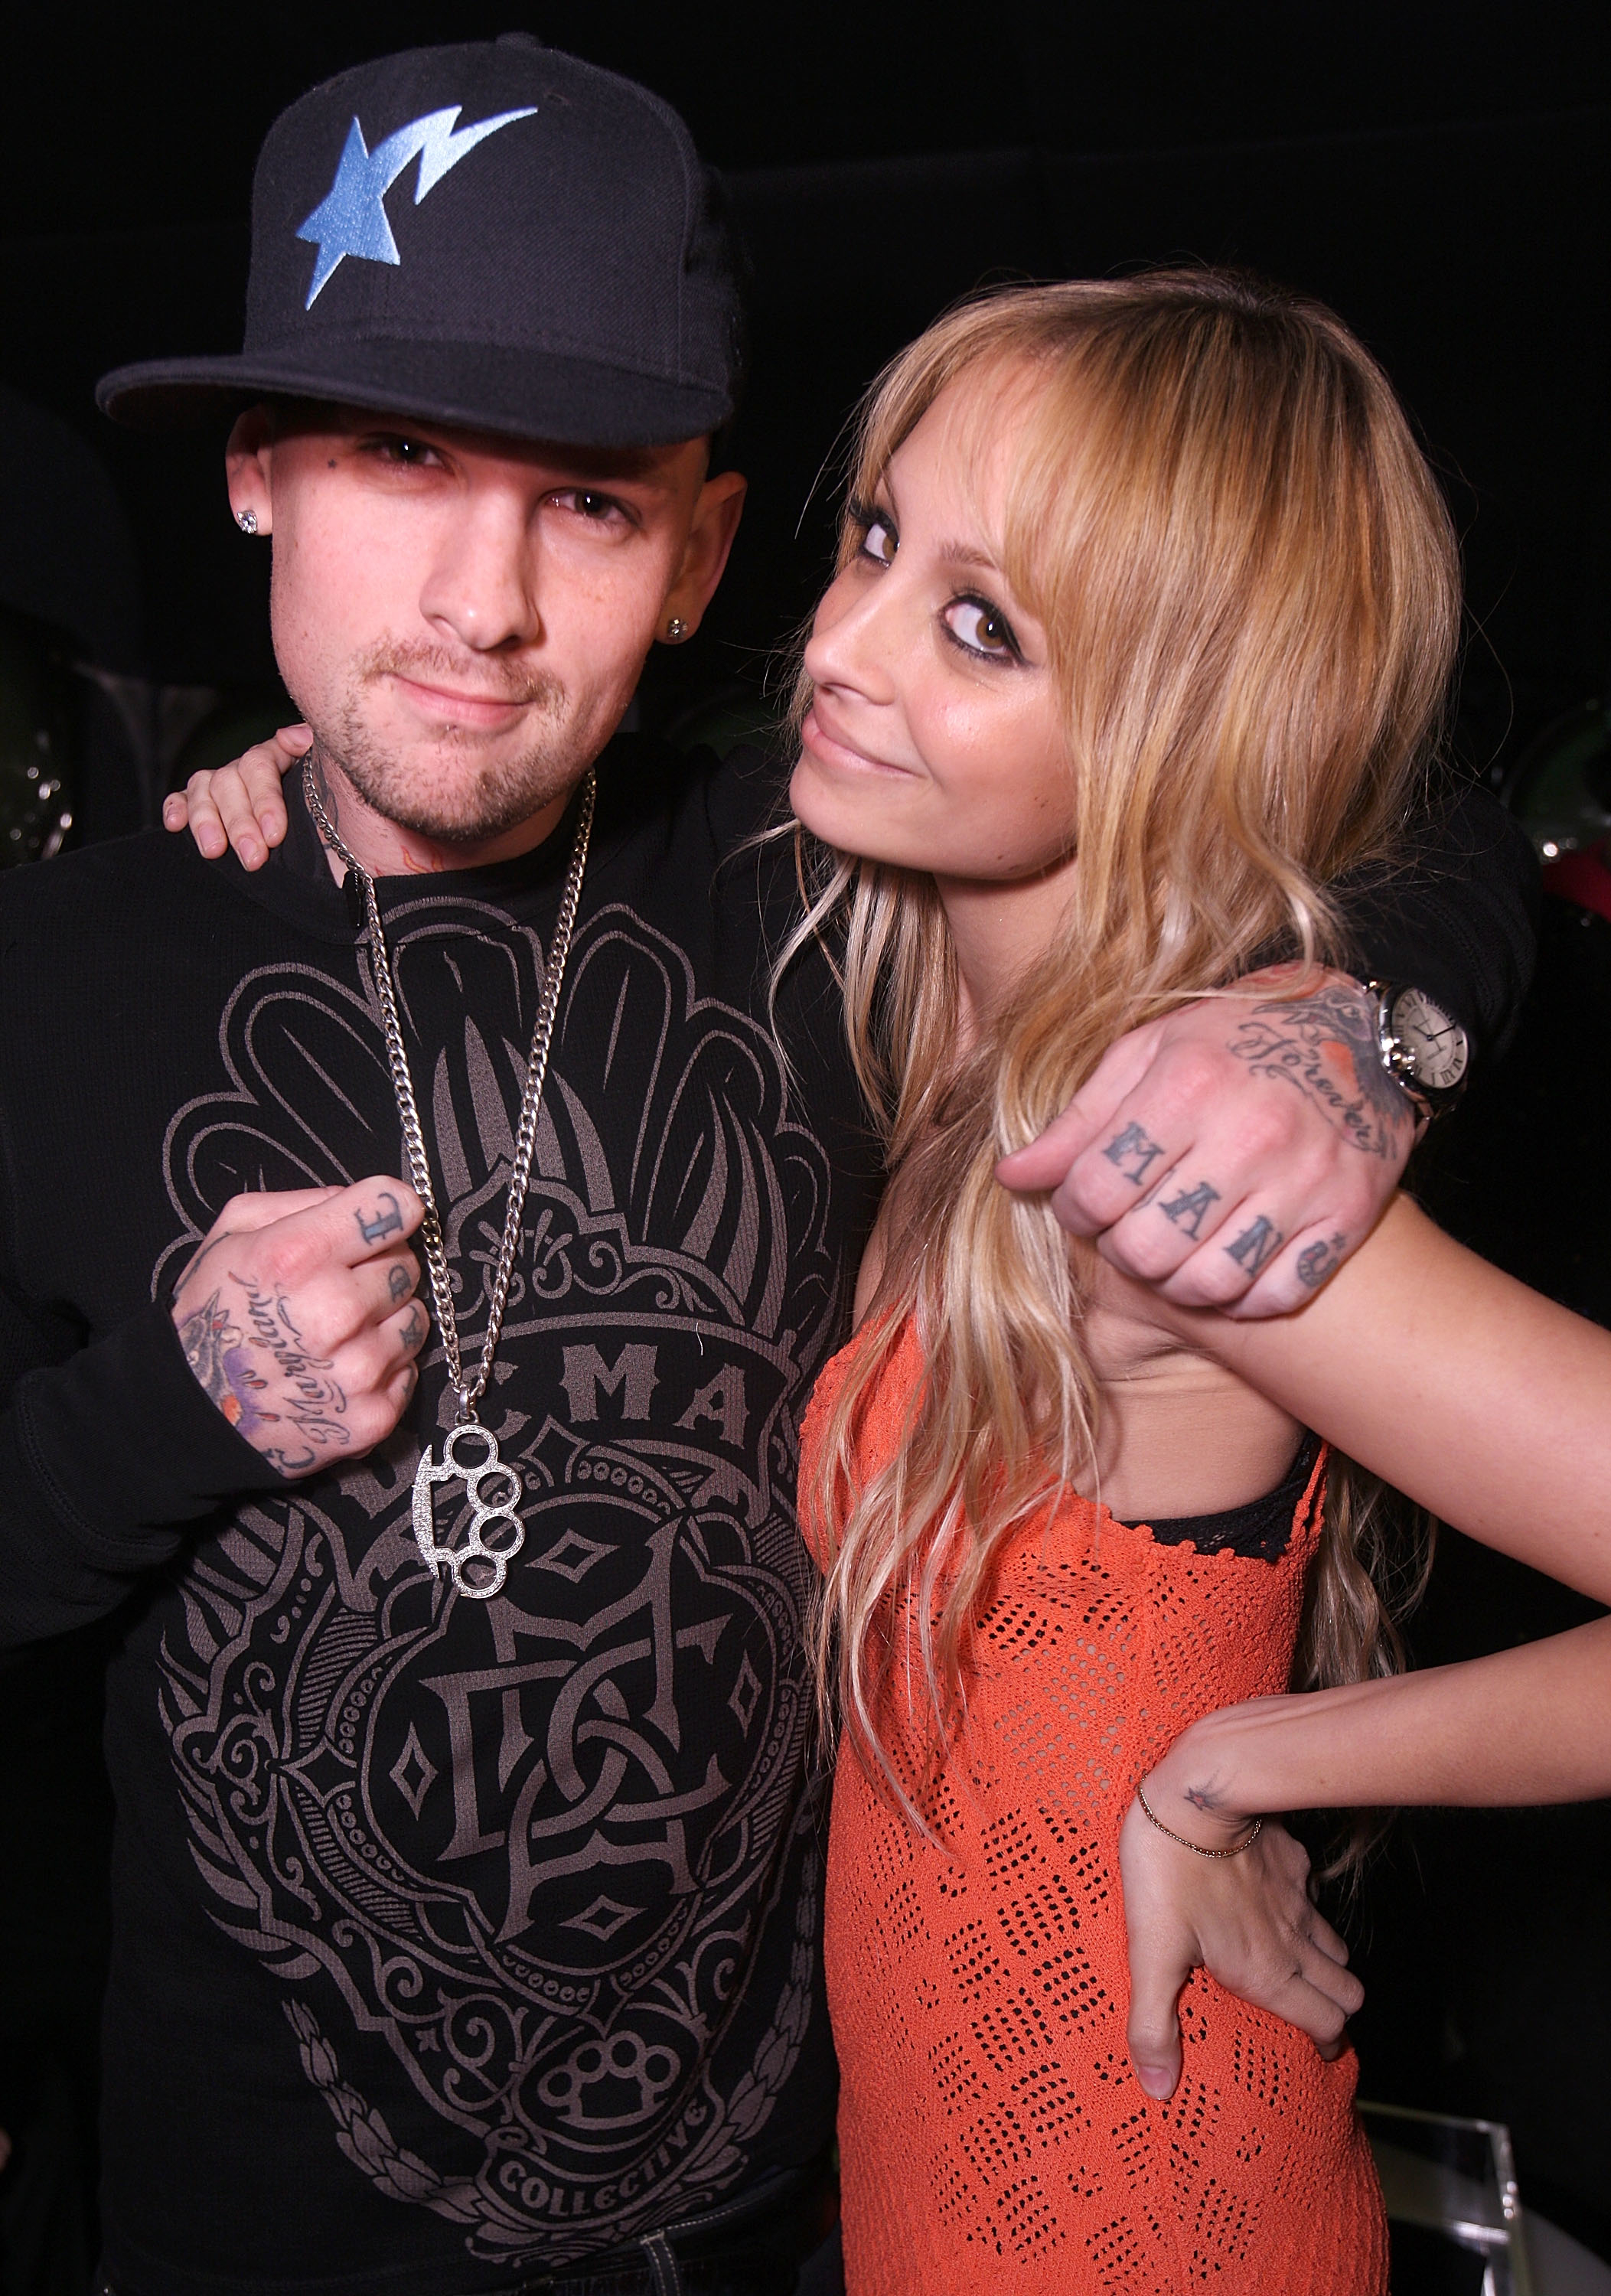 Two individuals posing closely; one wearing a graphic tee and cap, the other in a scoop neck top with visible tattoos